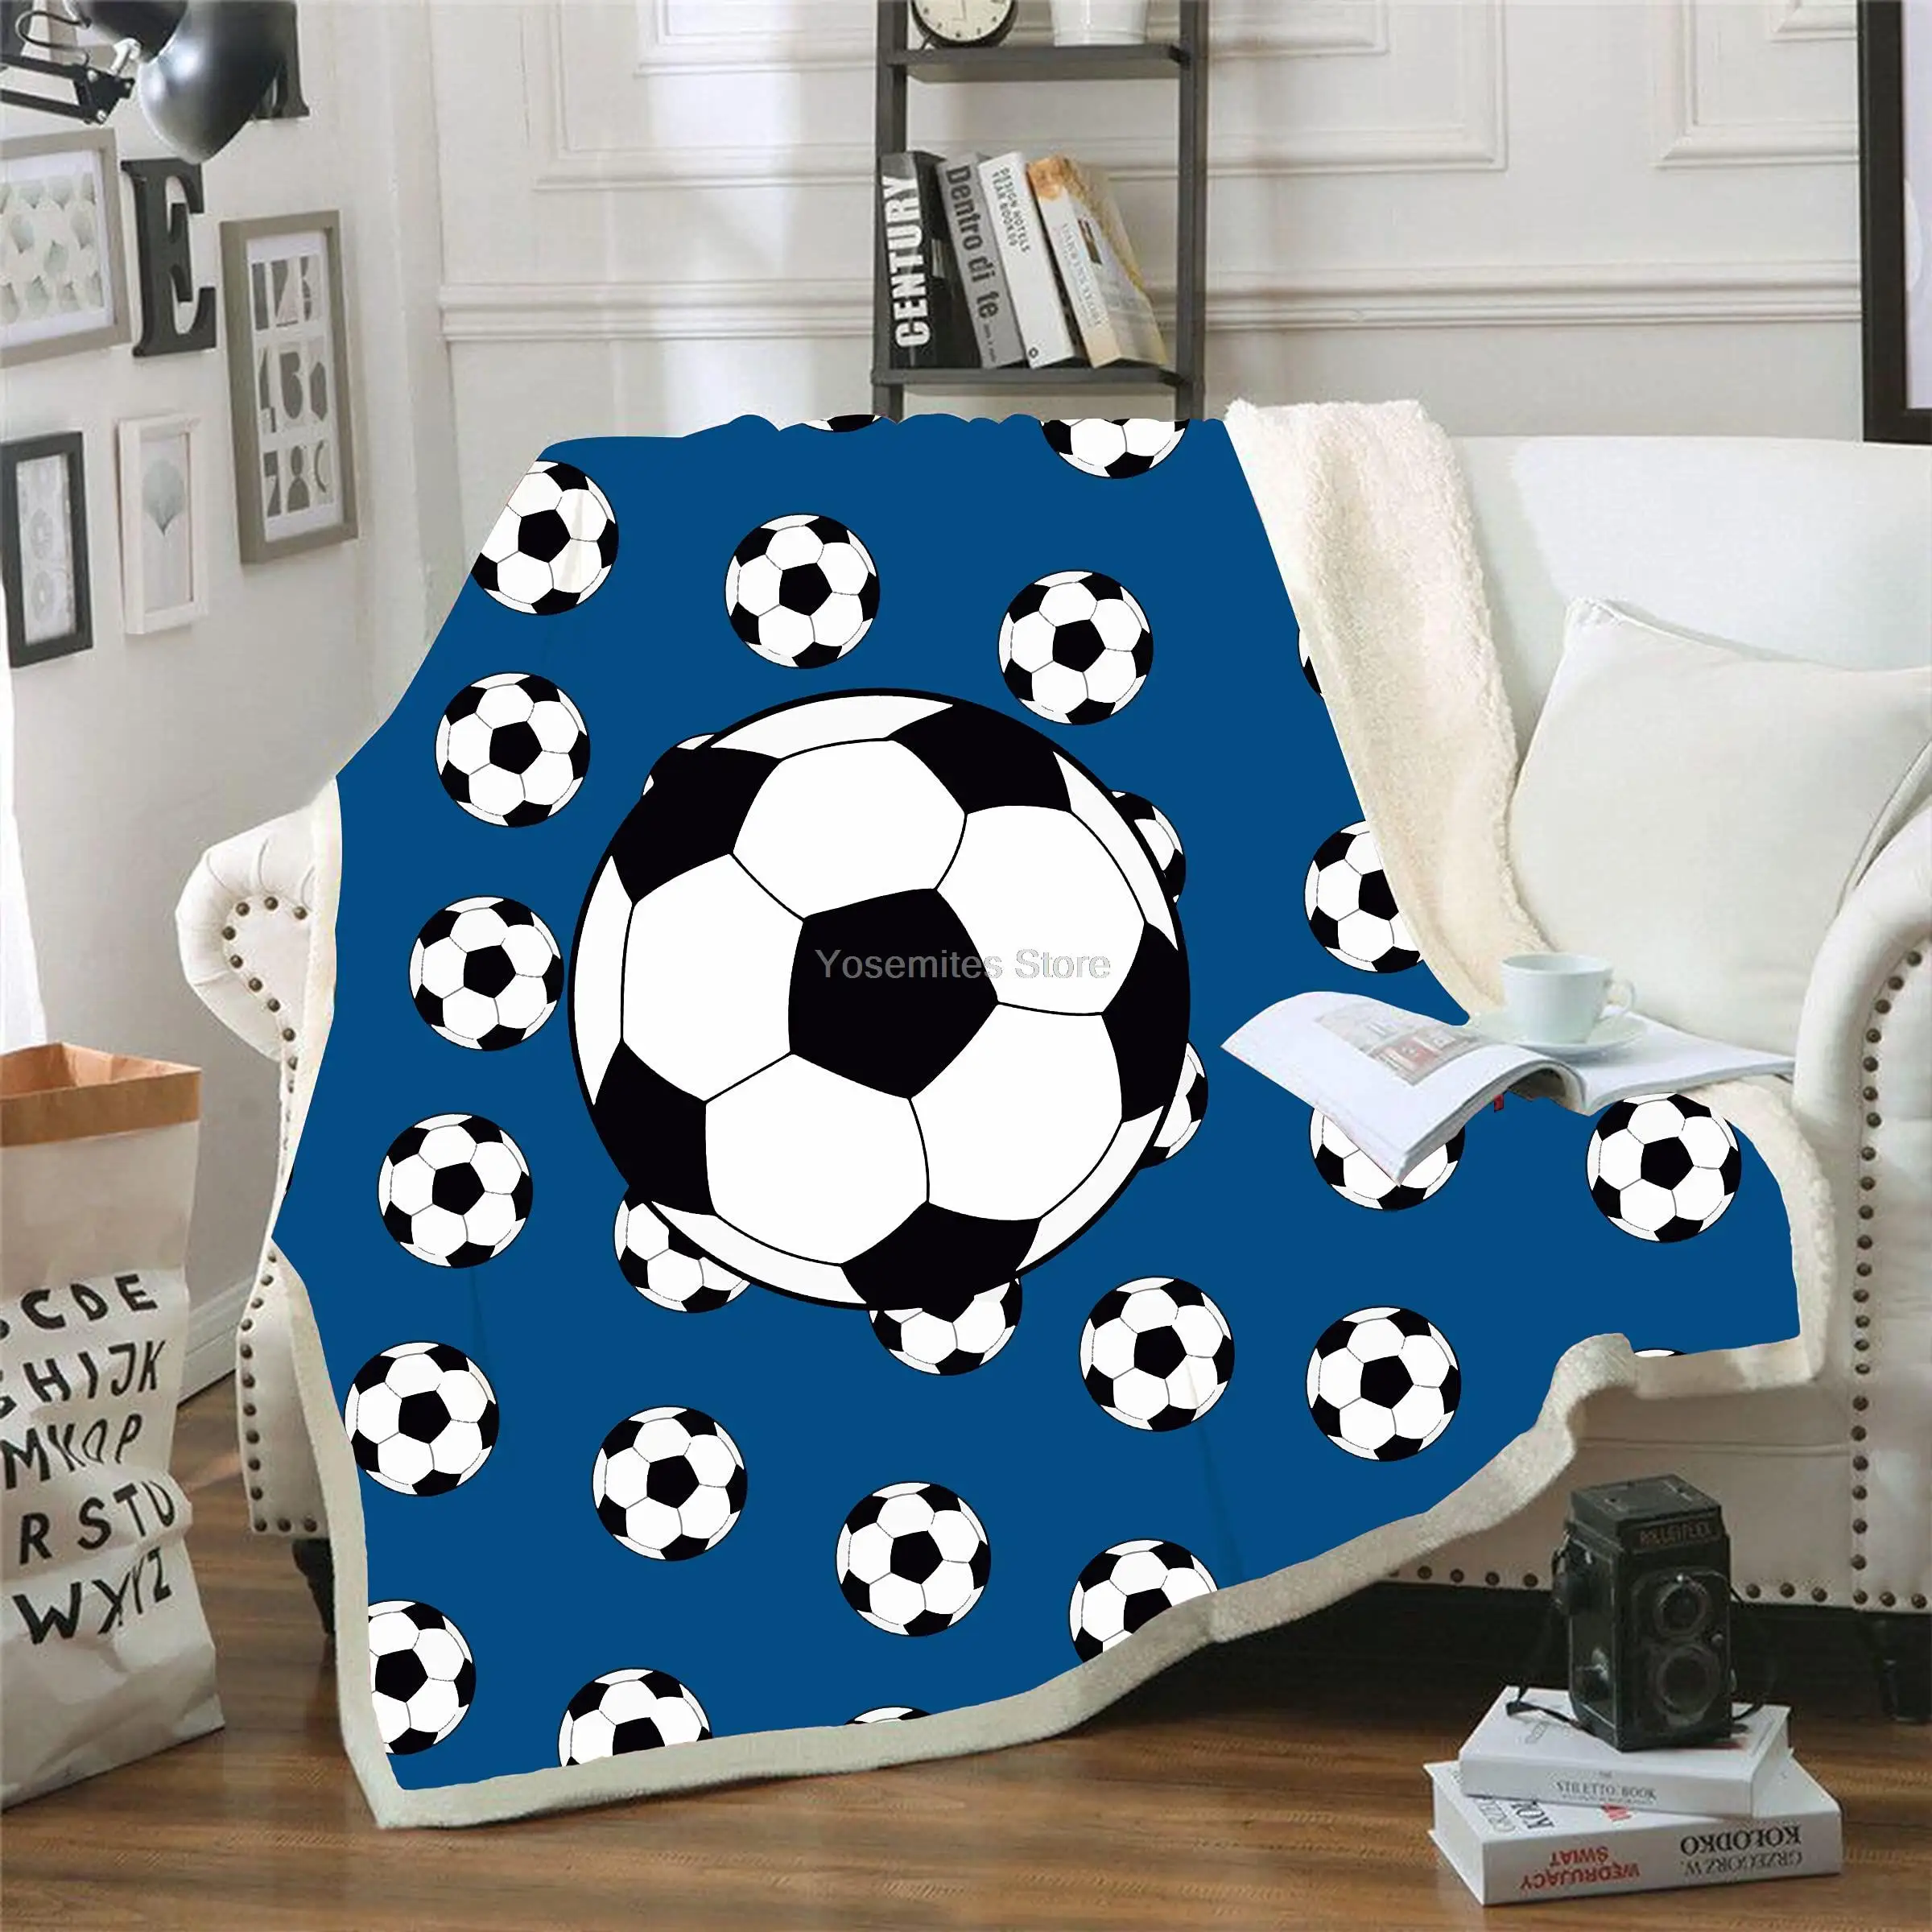 Soft Soccer Blanket Microfiber Sherpa Throw Blanket for Couch Bed Kids Adults Plush Fleece Throw Blankets Gifts for Soccer Fans